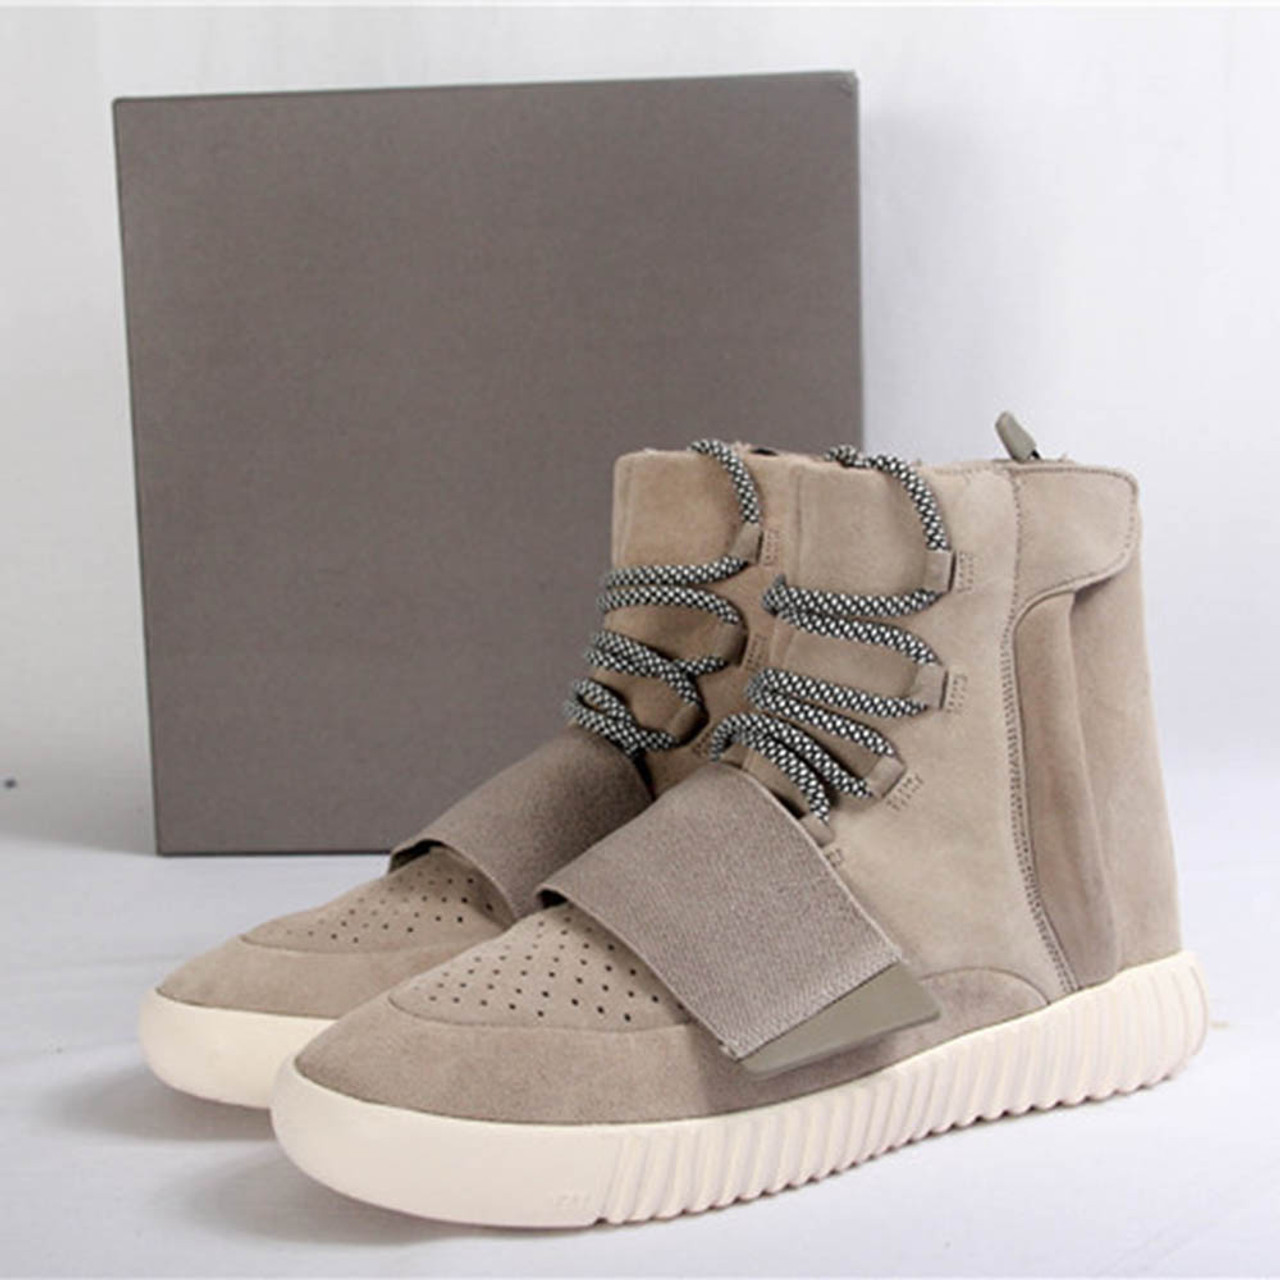 where to buy the best stockX UA High quality replica Adidas Yeezy boost 750 colorway sneakers (OG, All black ,chocolate , light gray gum) Hypedripz is the best high quality trusted